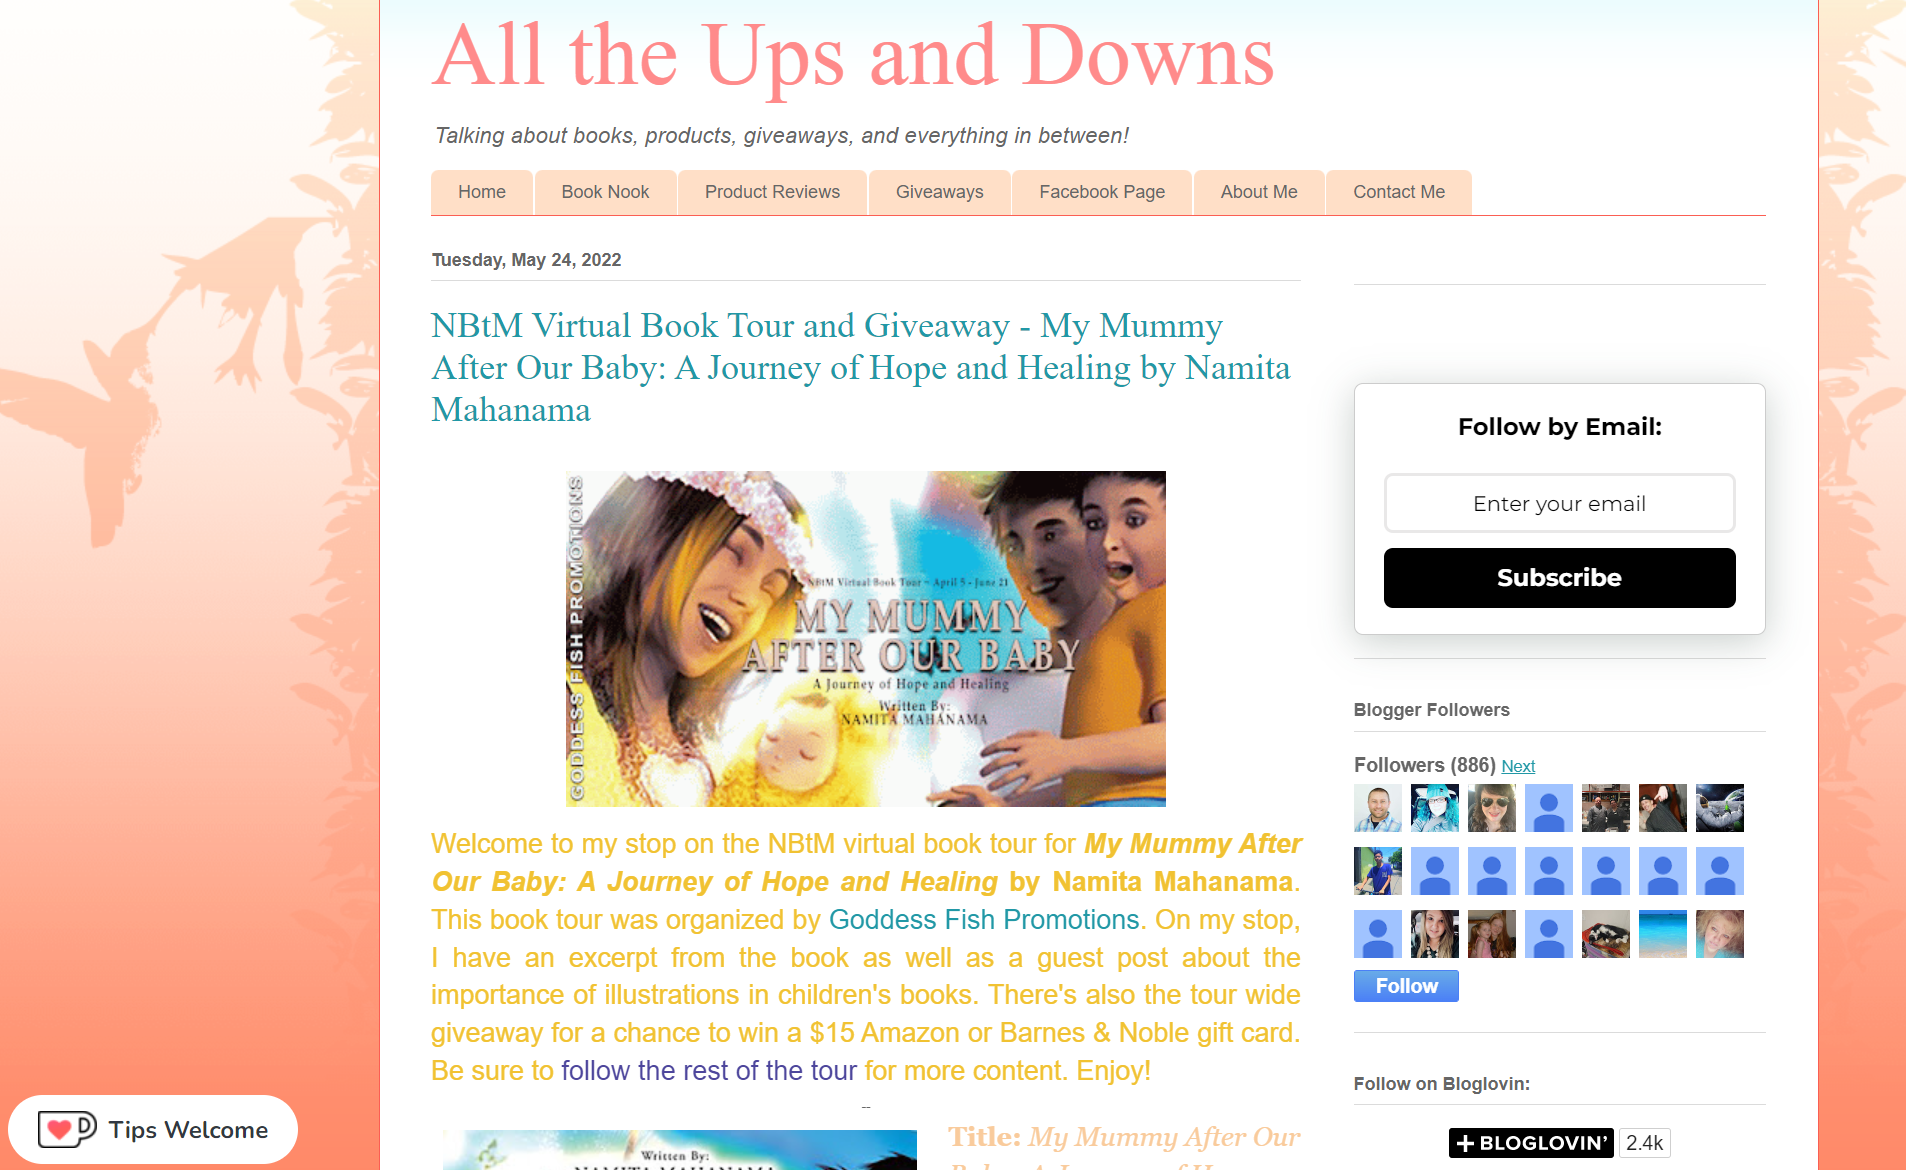 FEATURED IN ALL THE UPS AND DOWNS BLOG